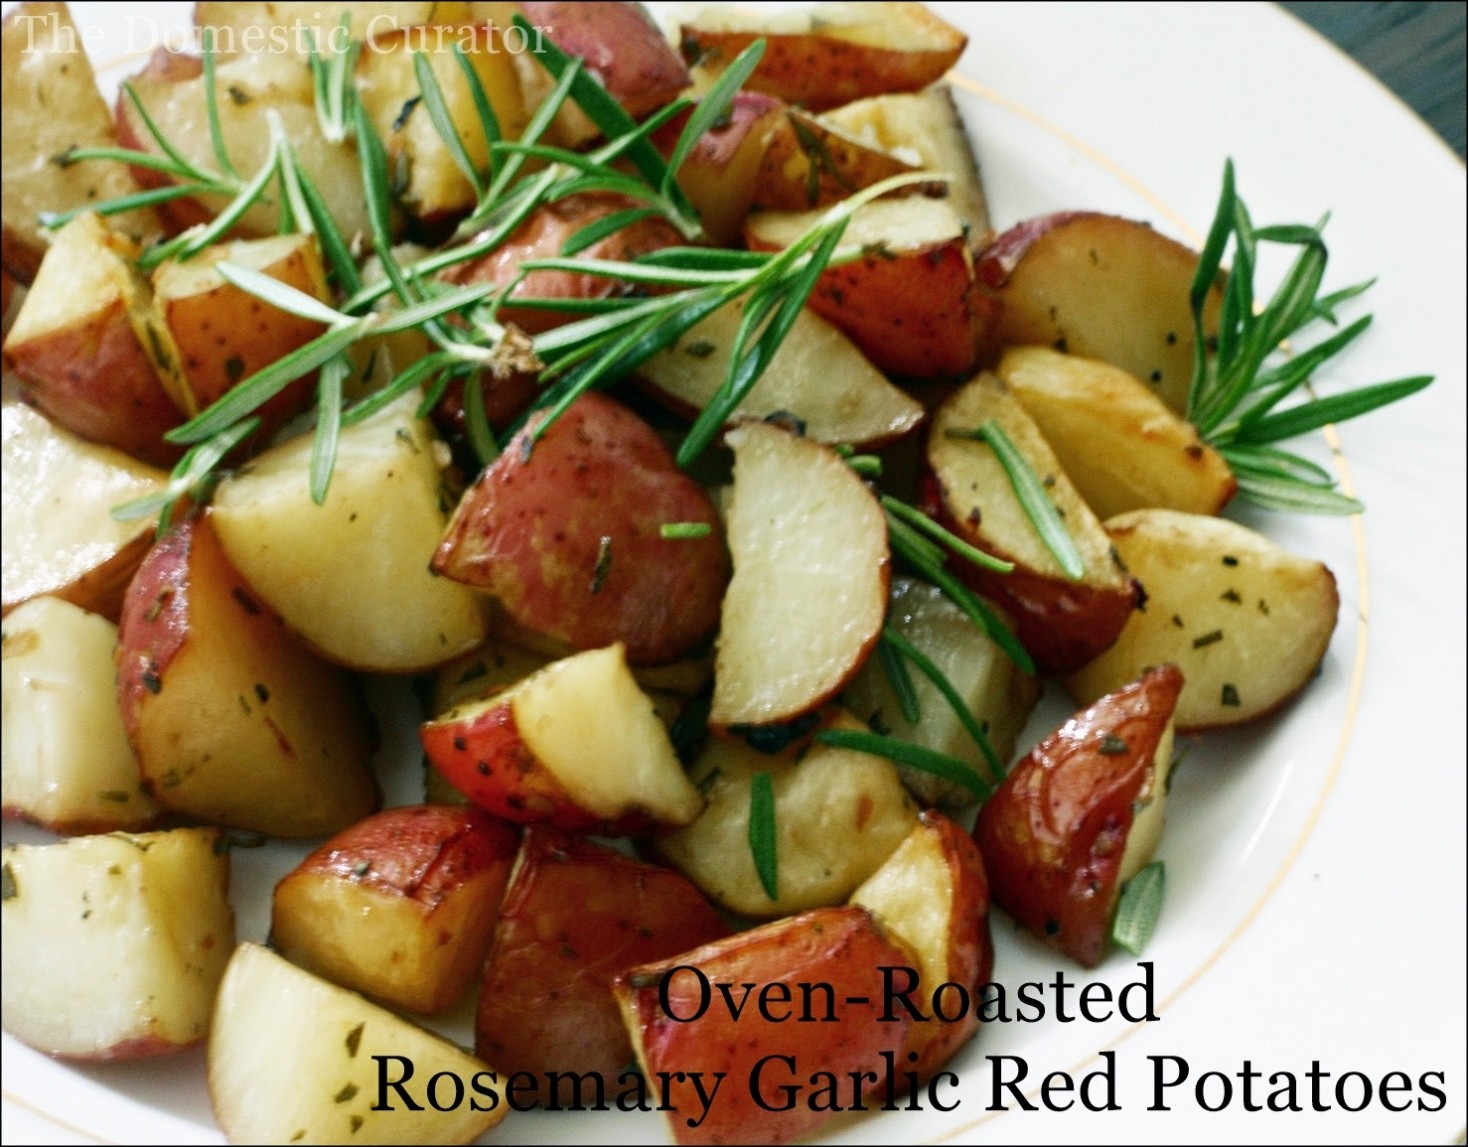 Oven-Roasted Rosemary Garlic Red Potatoes